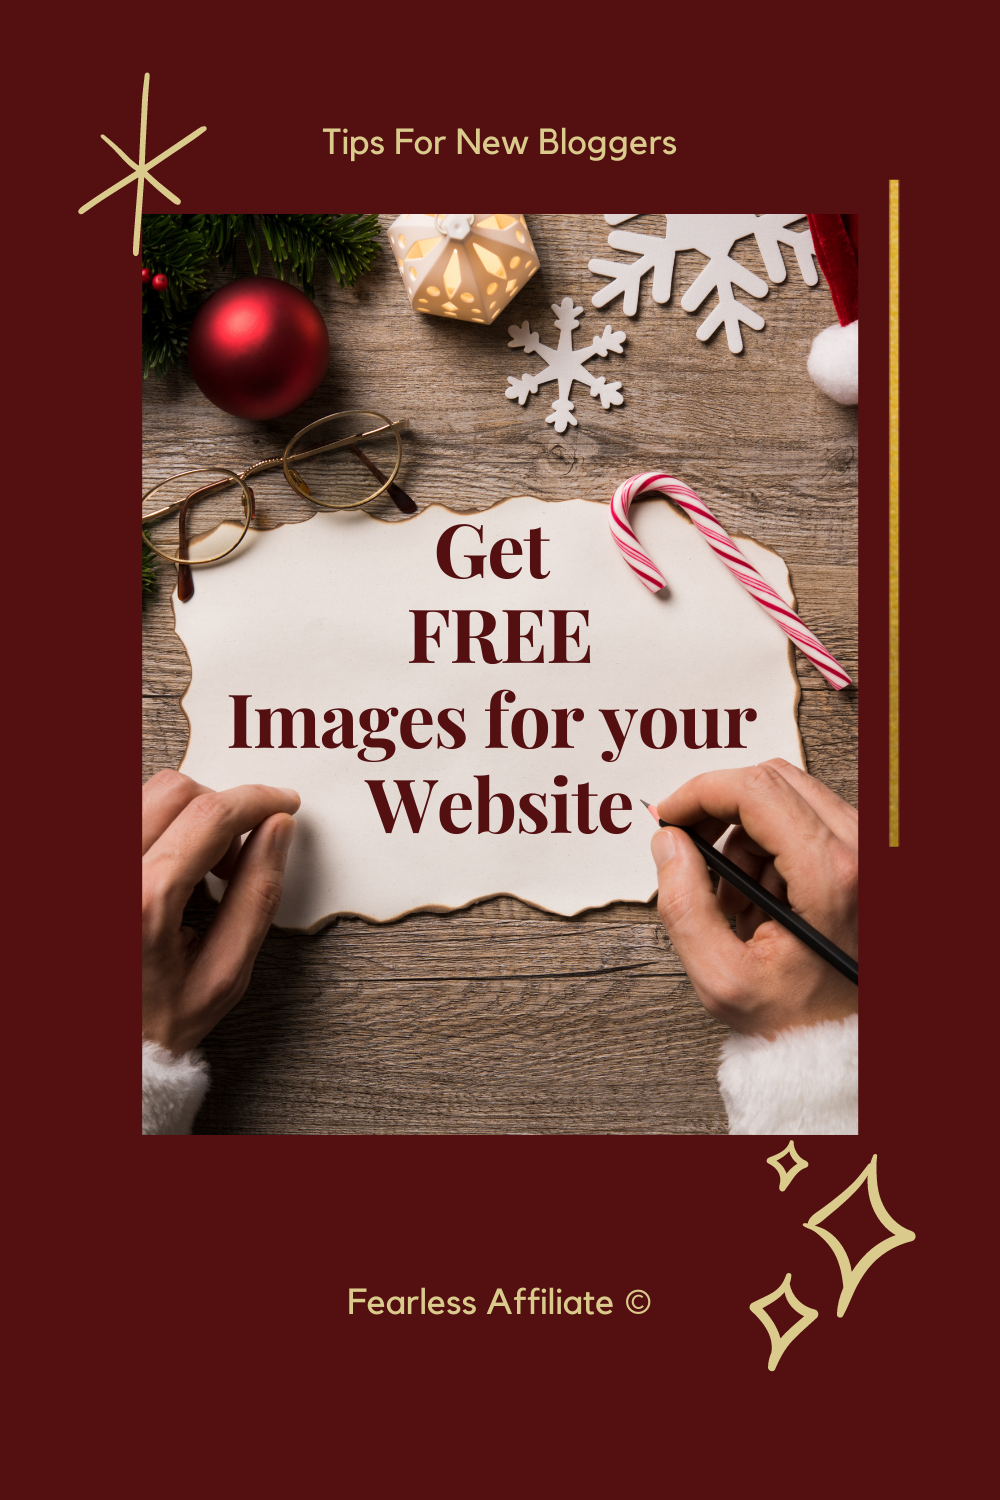 How To Get Free Images For Your Website